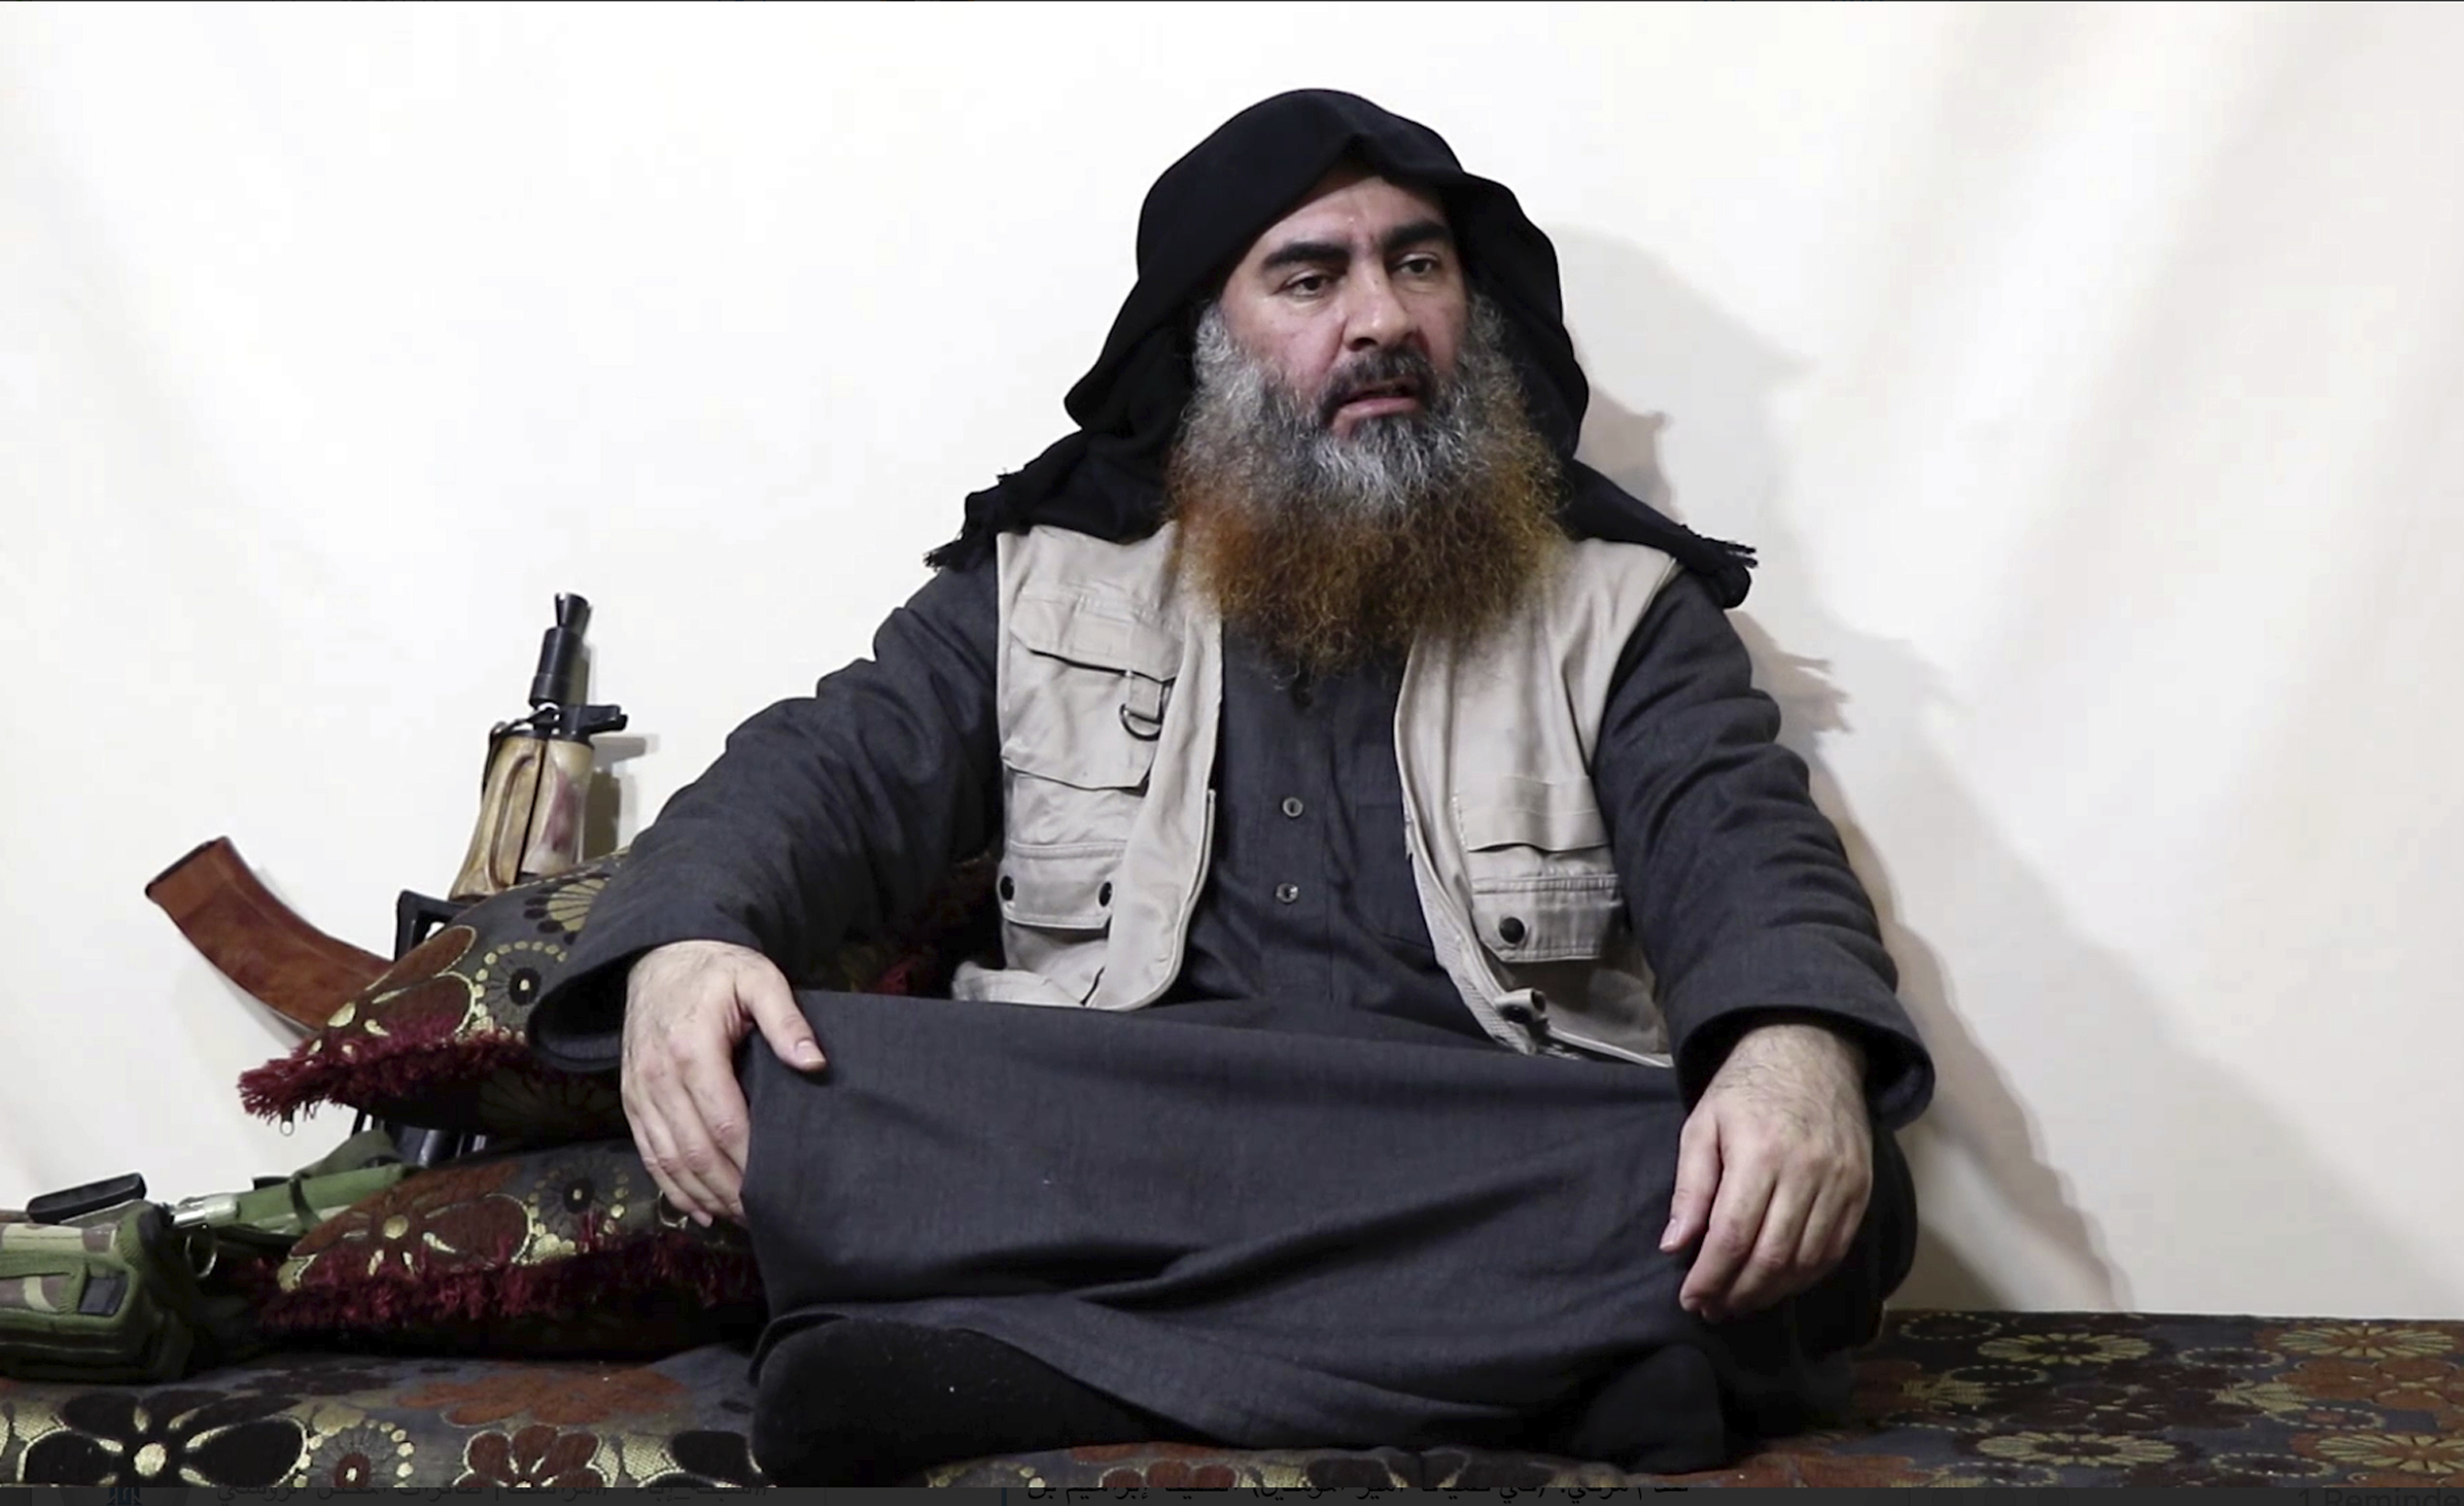 IS leader outlines path forward for his group post-caliphate